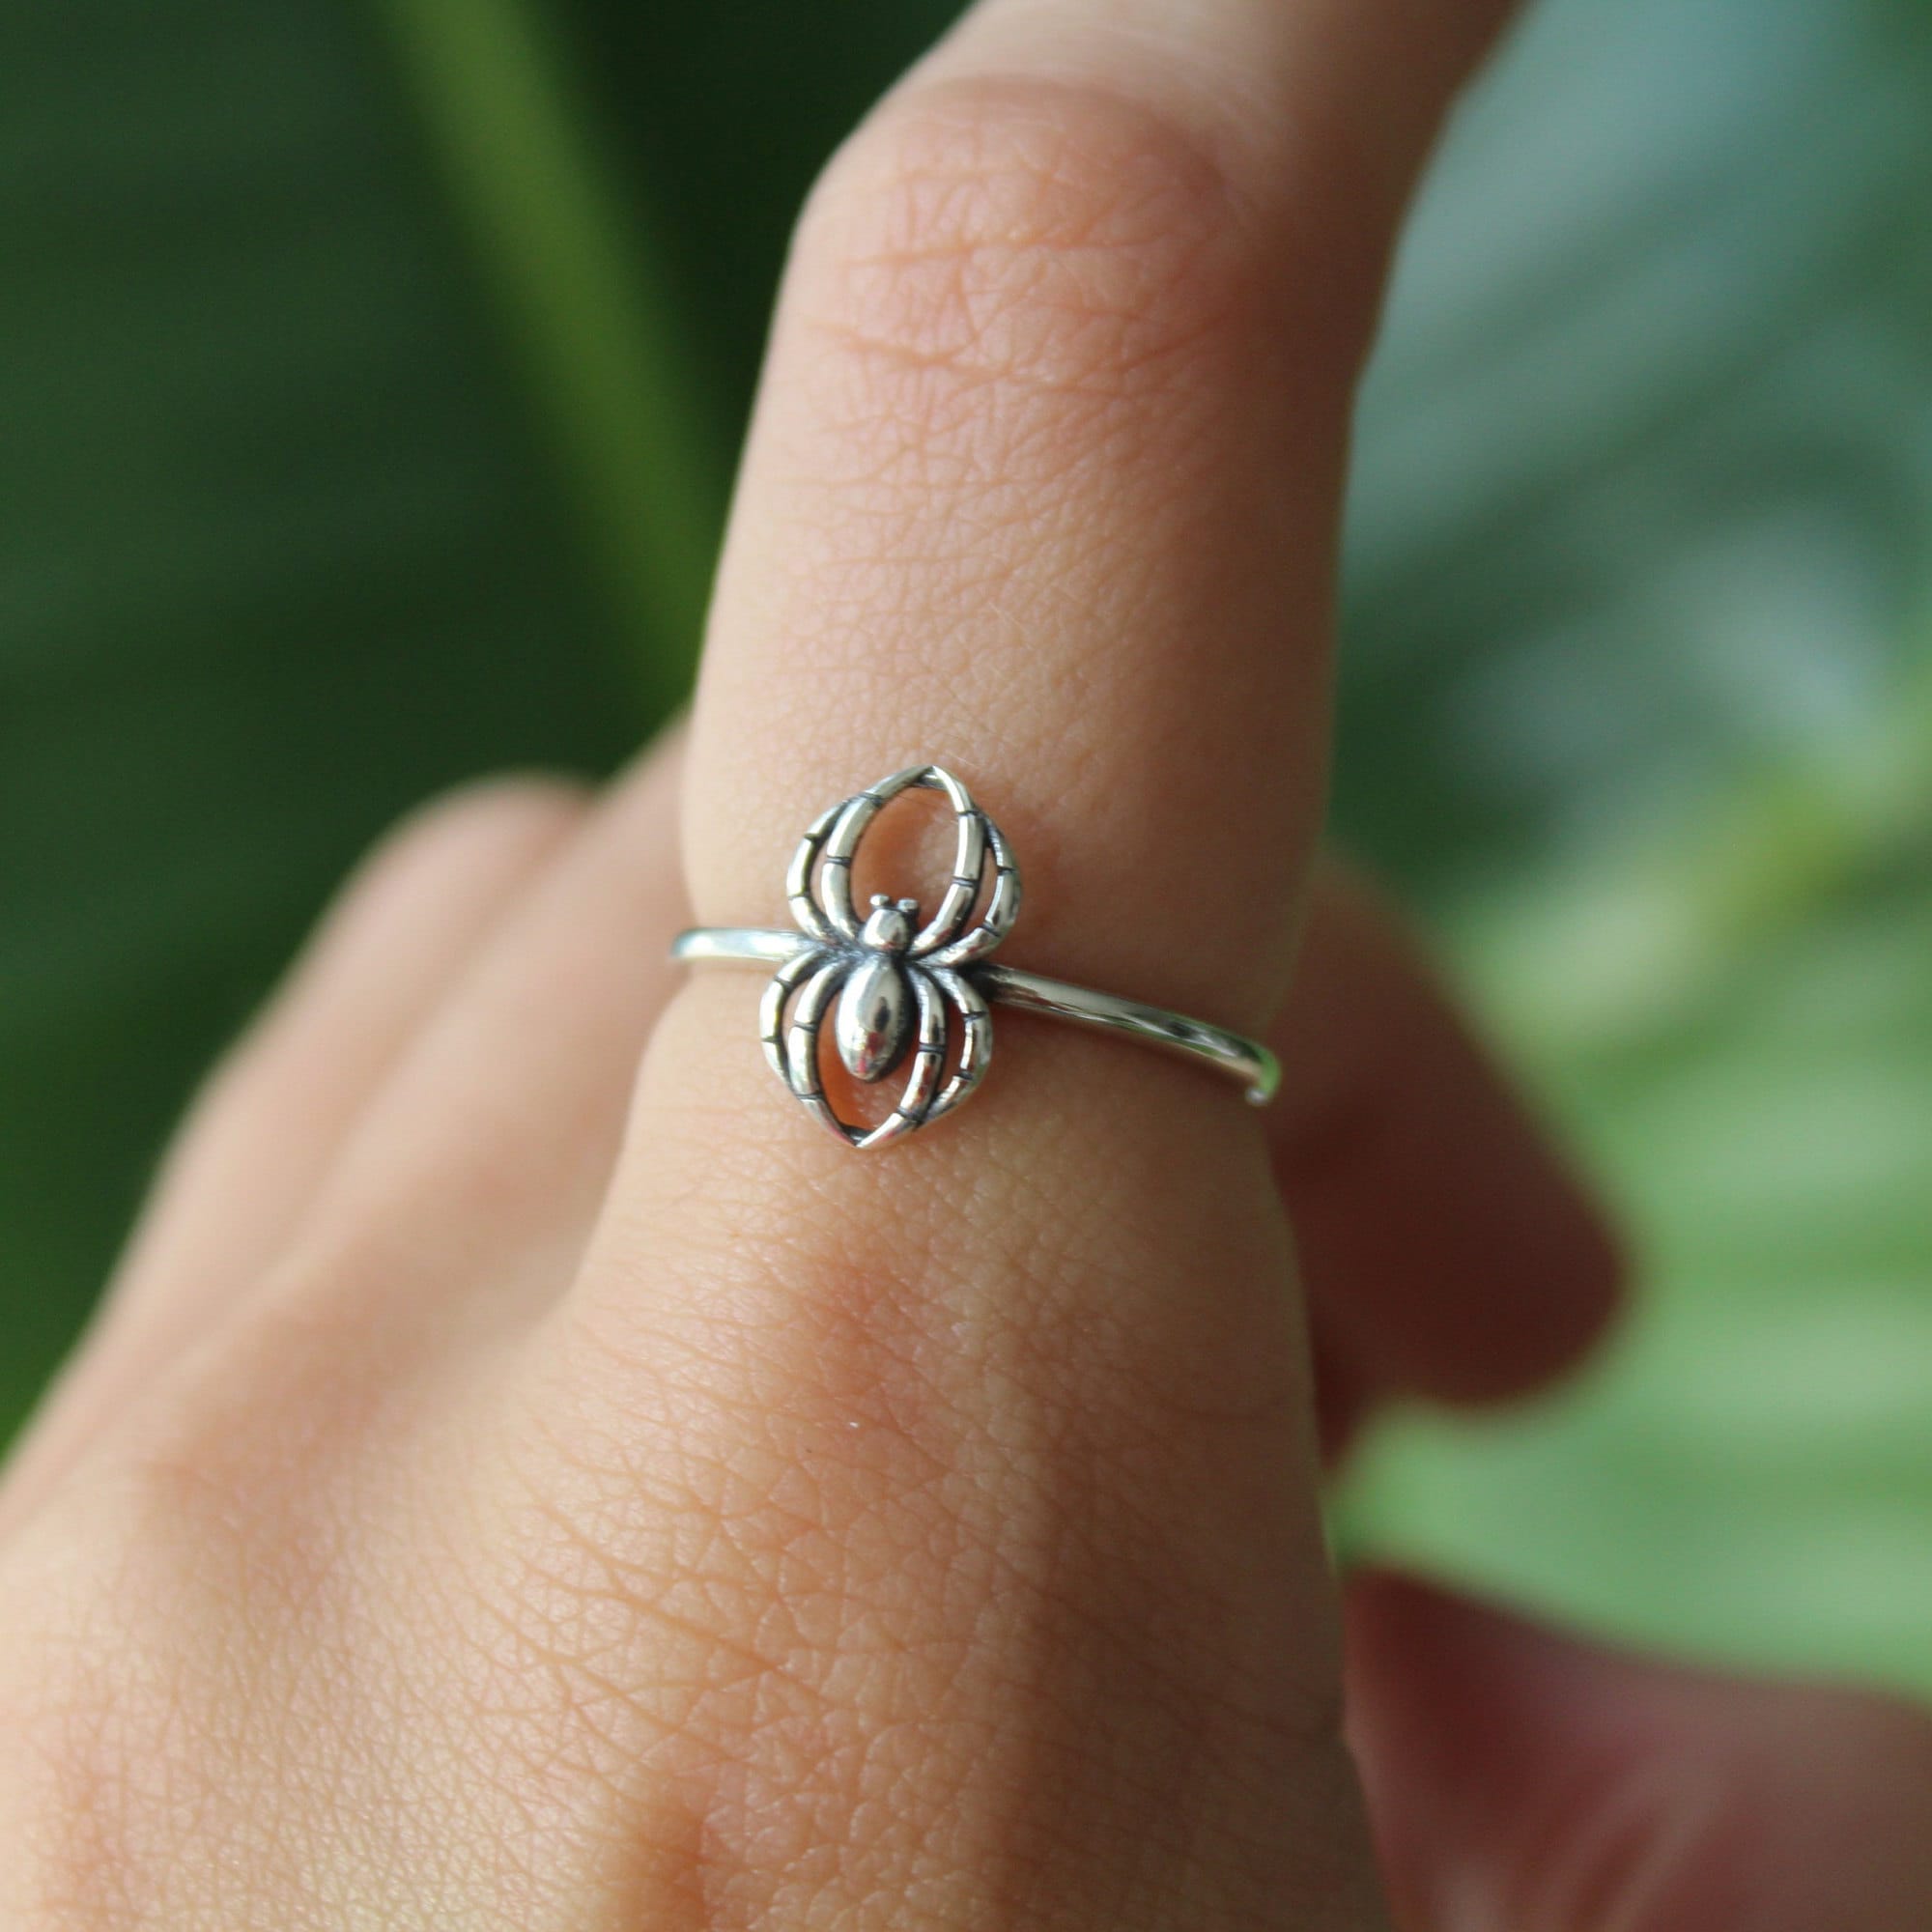 Spider onyx sterling silver ring - Imsmistyle